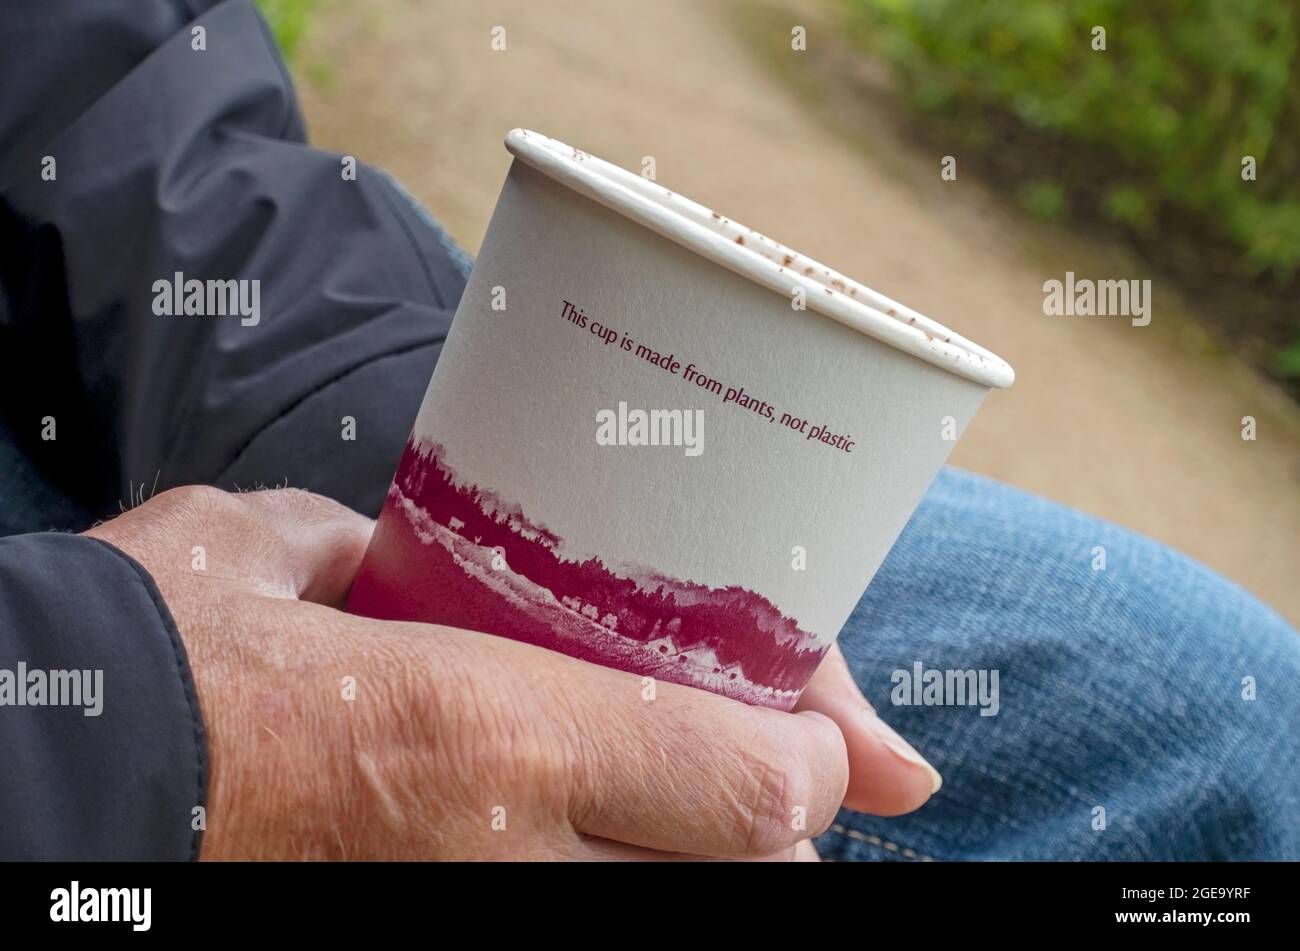 Close up of hand holding drinks cup made from plants. Stock Photo